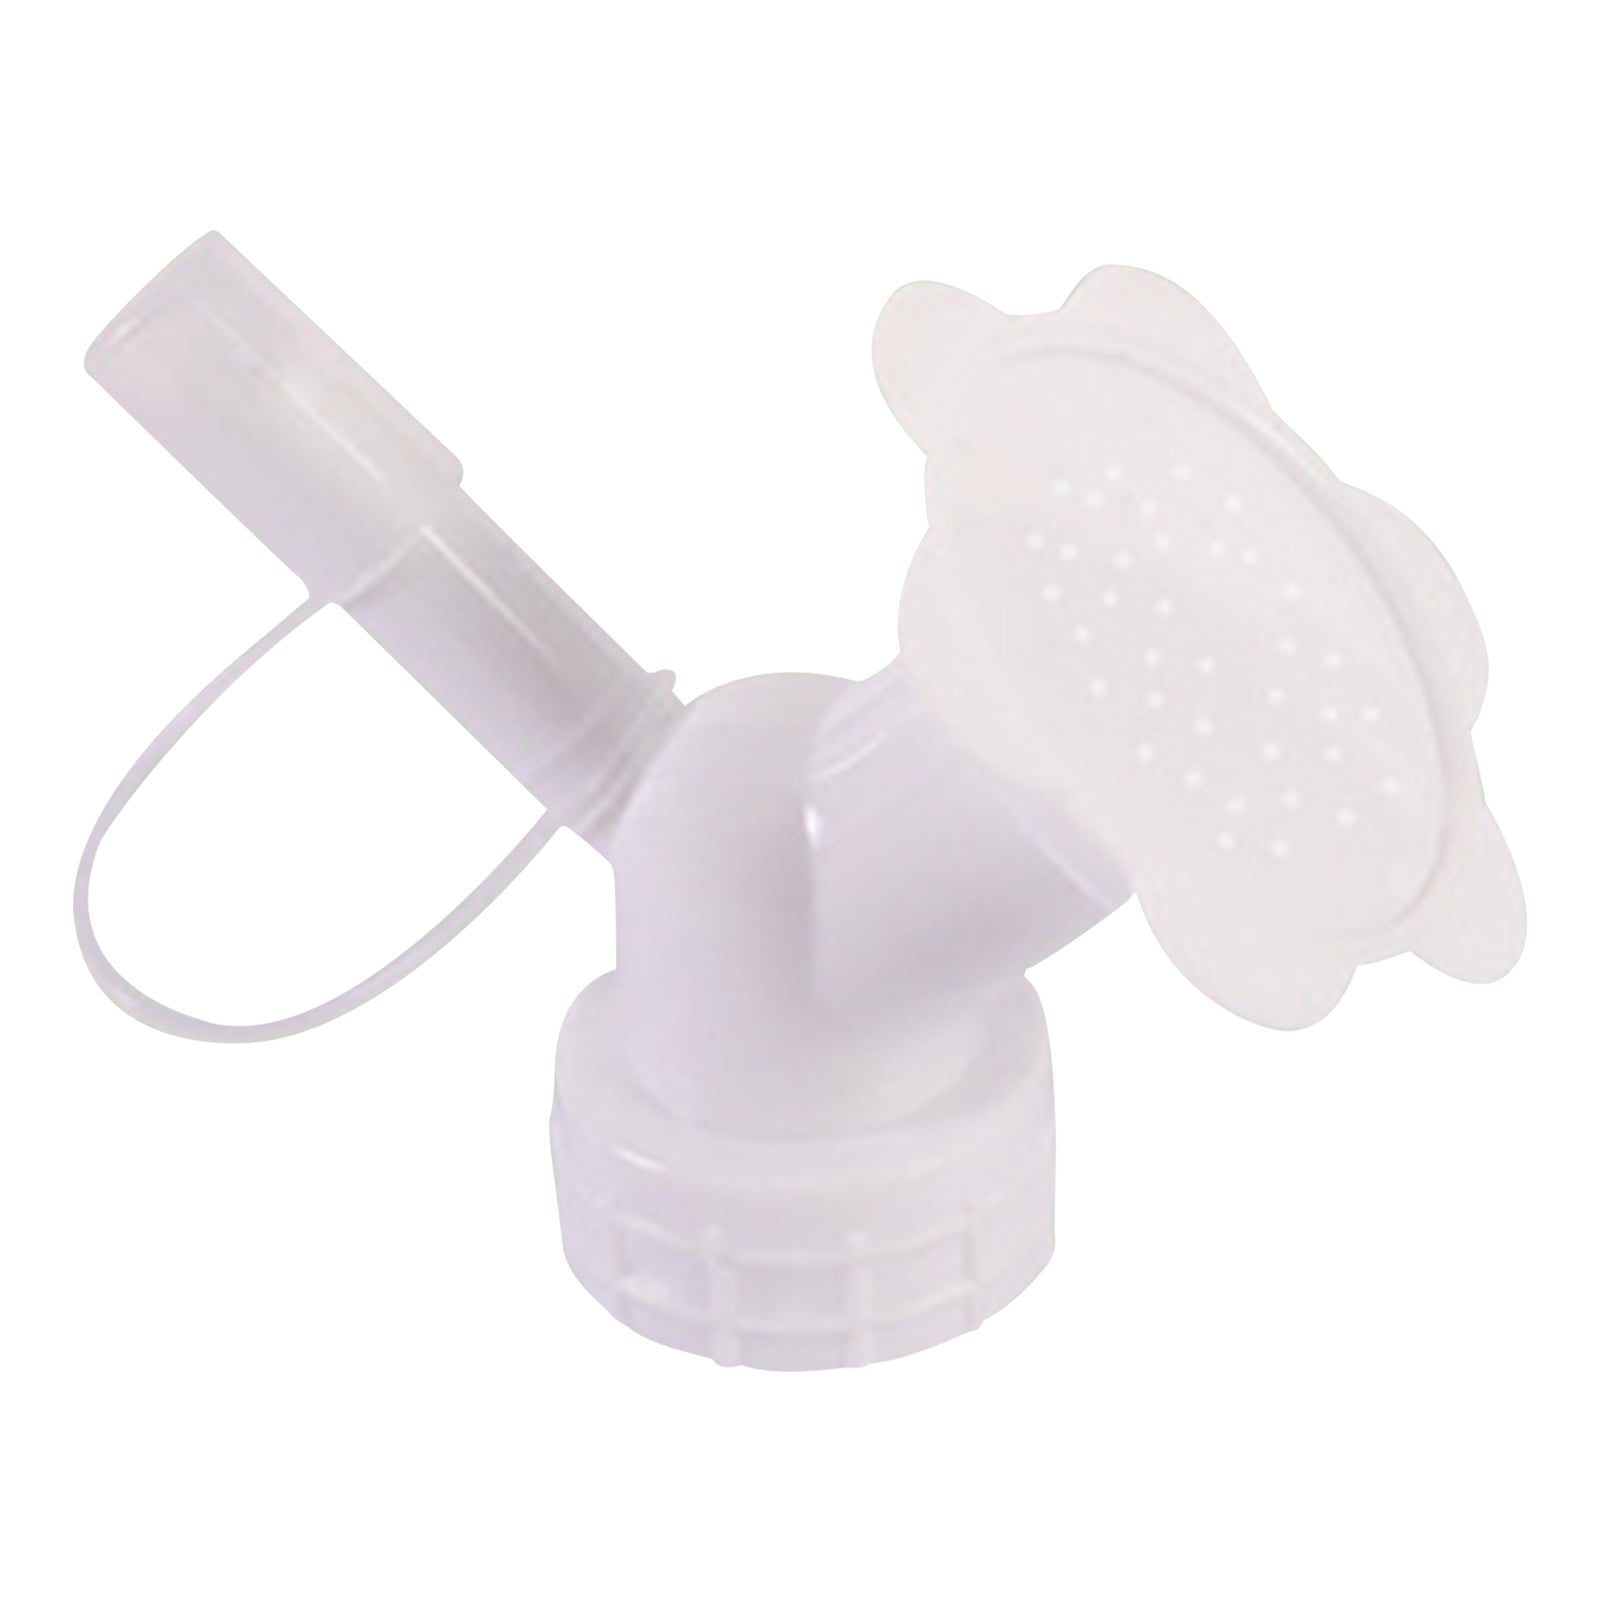 Plastic Sprinkler Nozzle For Waterers Bottle Watering Cans Shower Head Welcome 